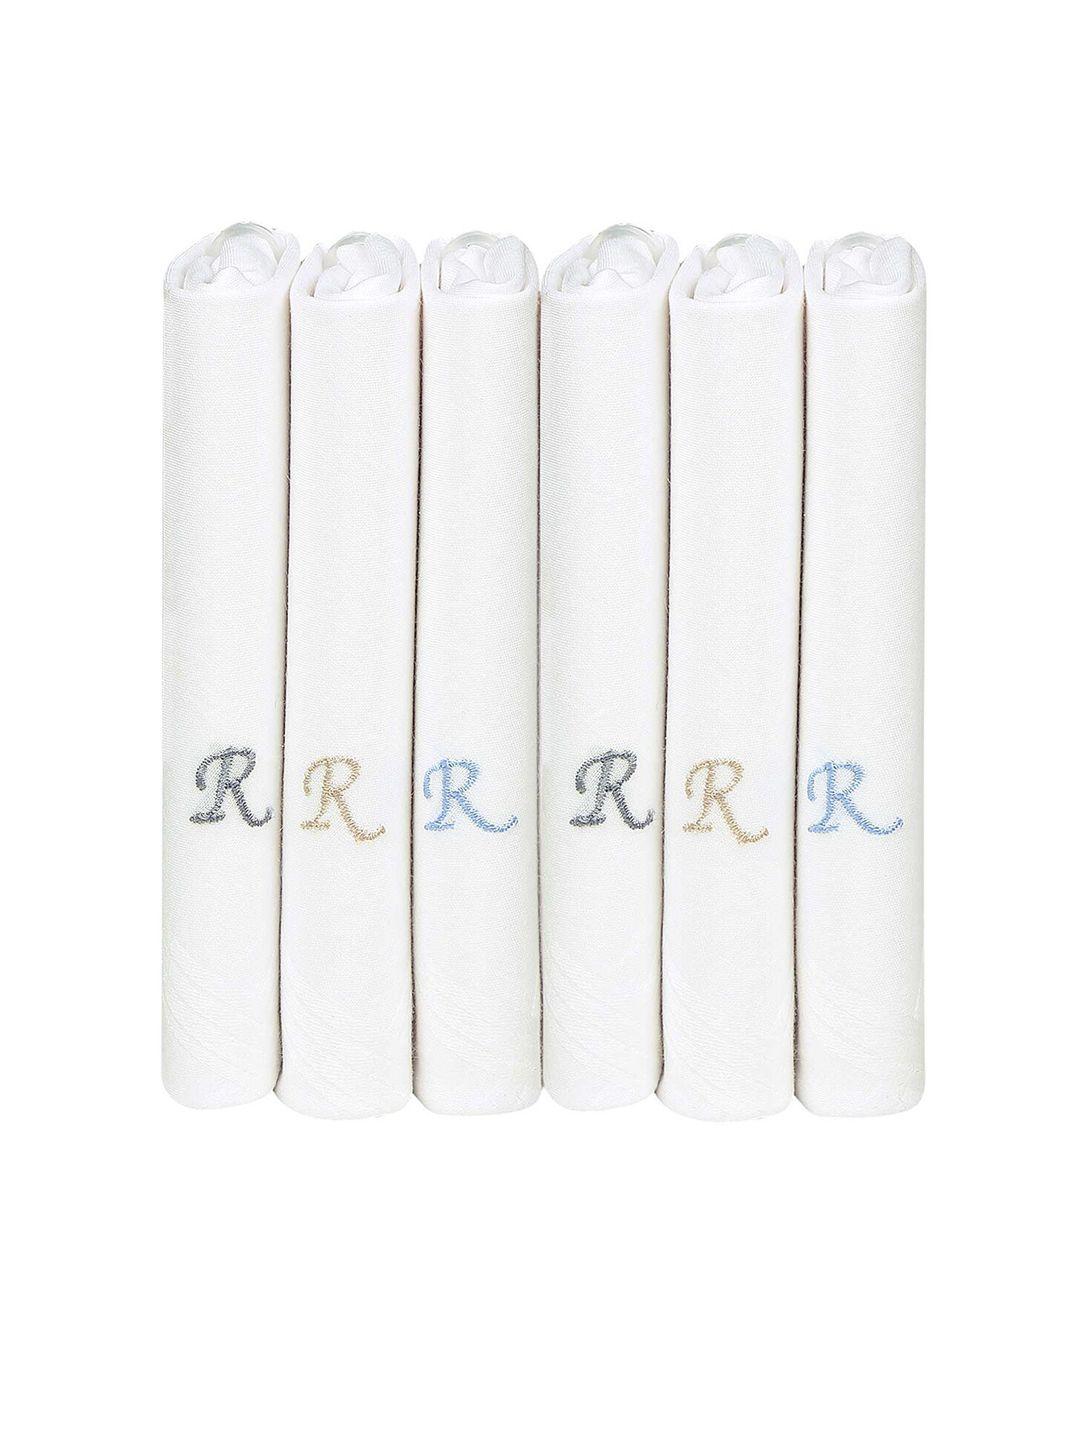 bonjour men pack of 6 white solid handkerchiefs accessory gift set with r initials